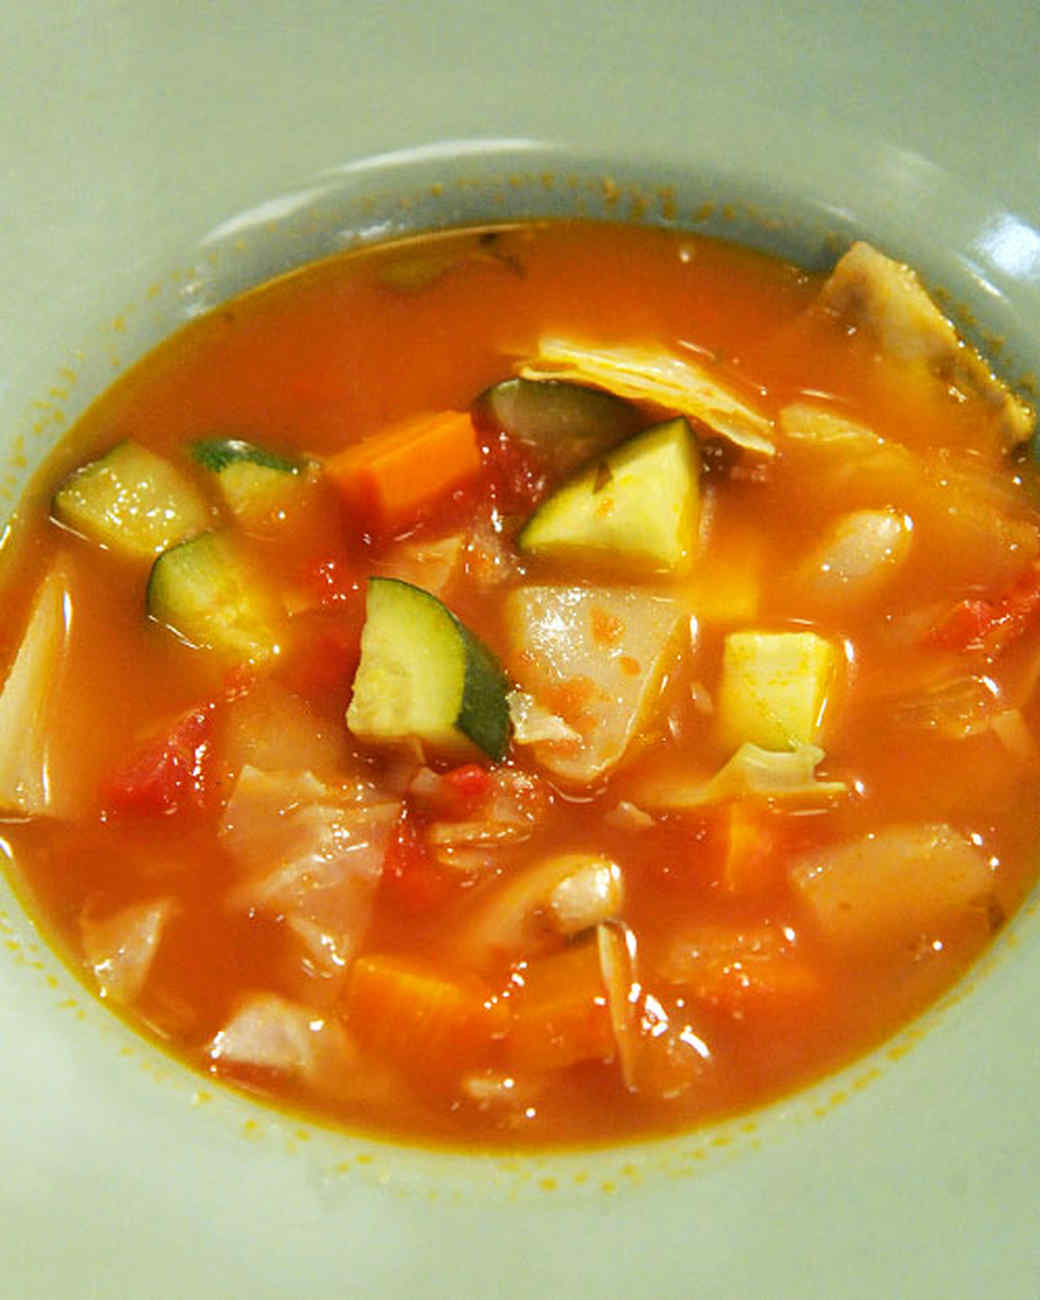 Easy Vegetable Soup Recipes That Are UltraSatisfying